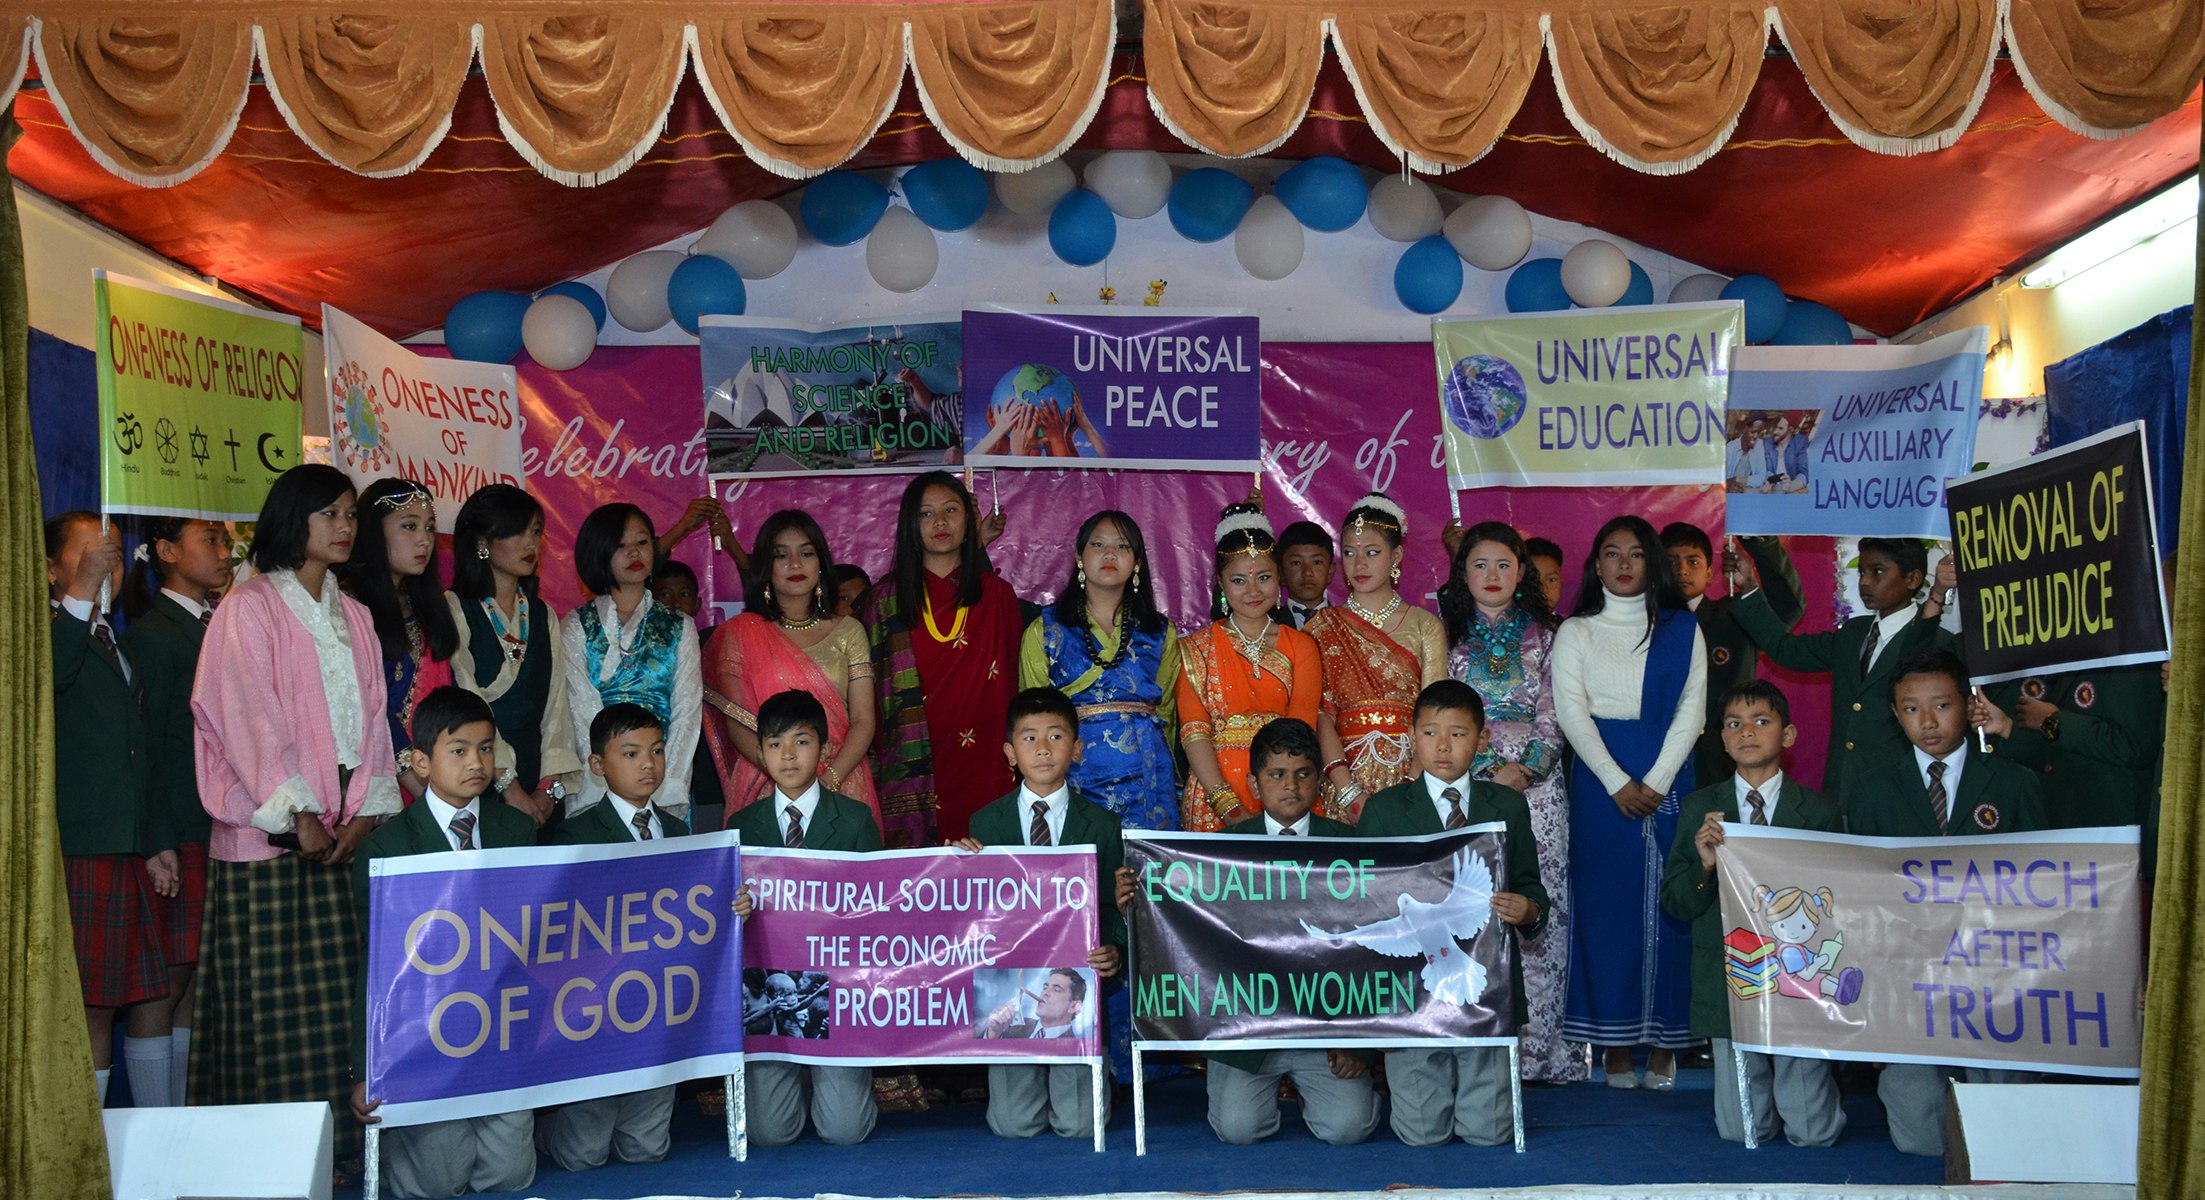 Empowered by Spiritual Principles: Students proudly showcase the essence of oneness of God, Universal education, and more through meaningful placards.